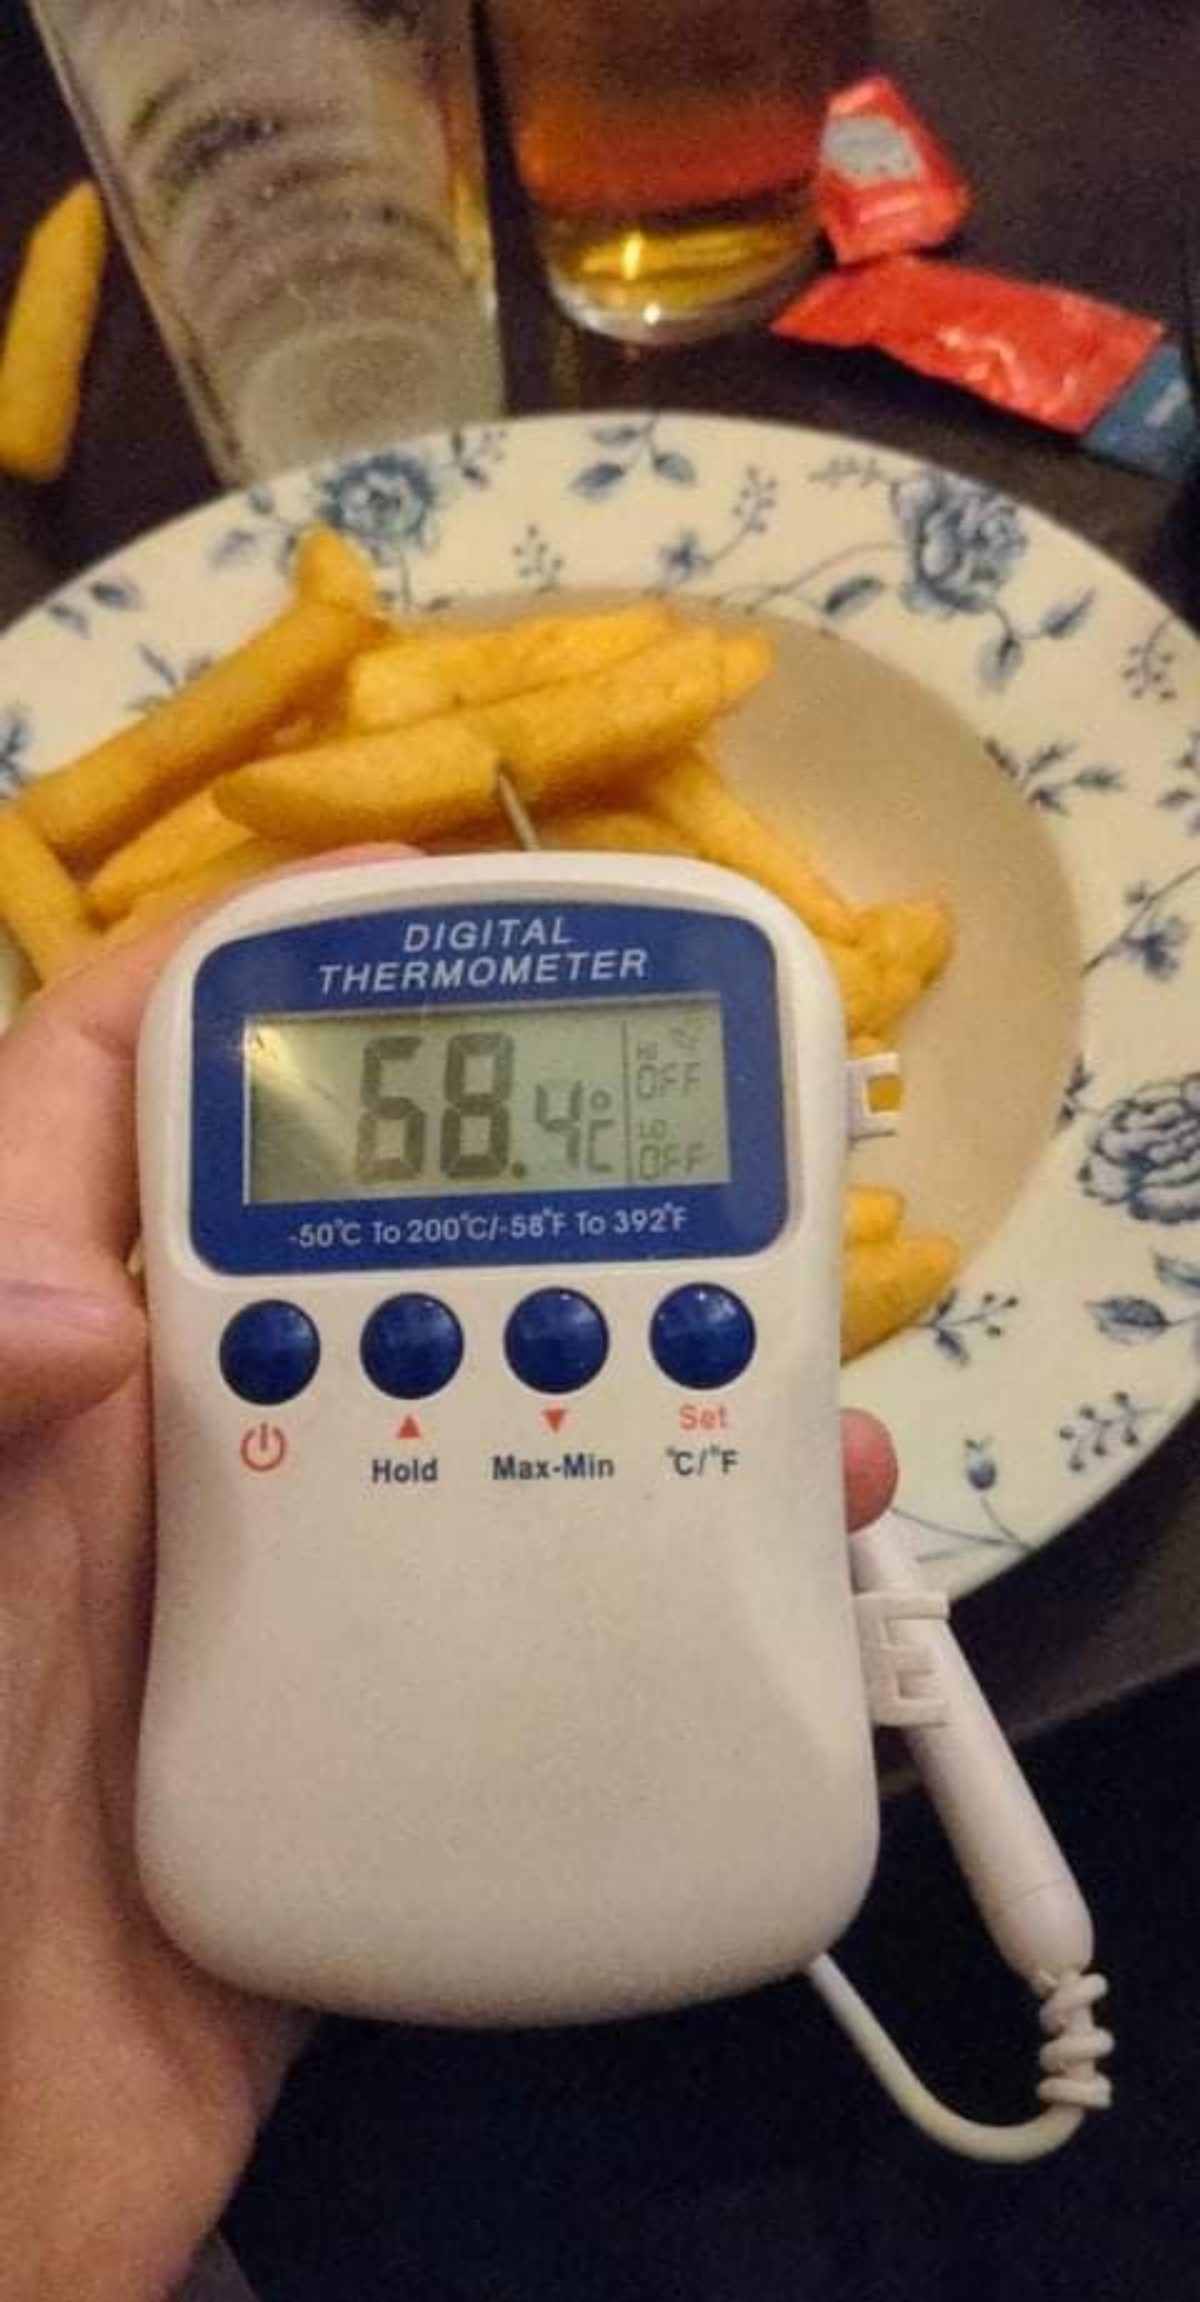 Robert's temperature probe - used to measure the warmth of the Wetherspoons chips